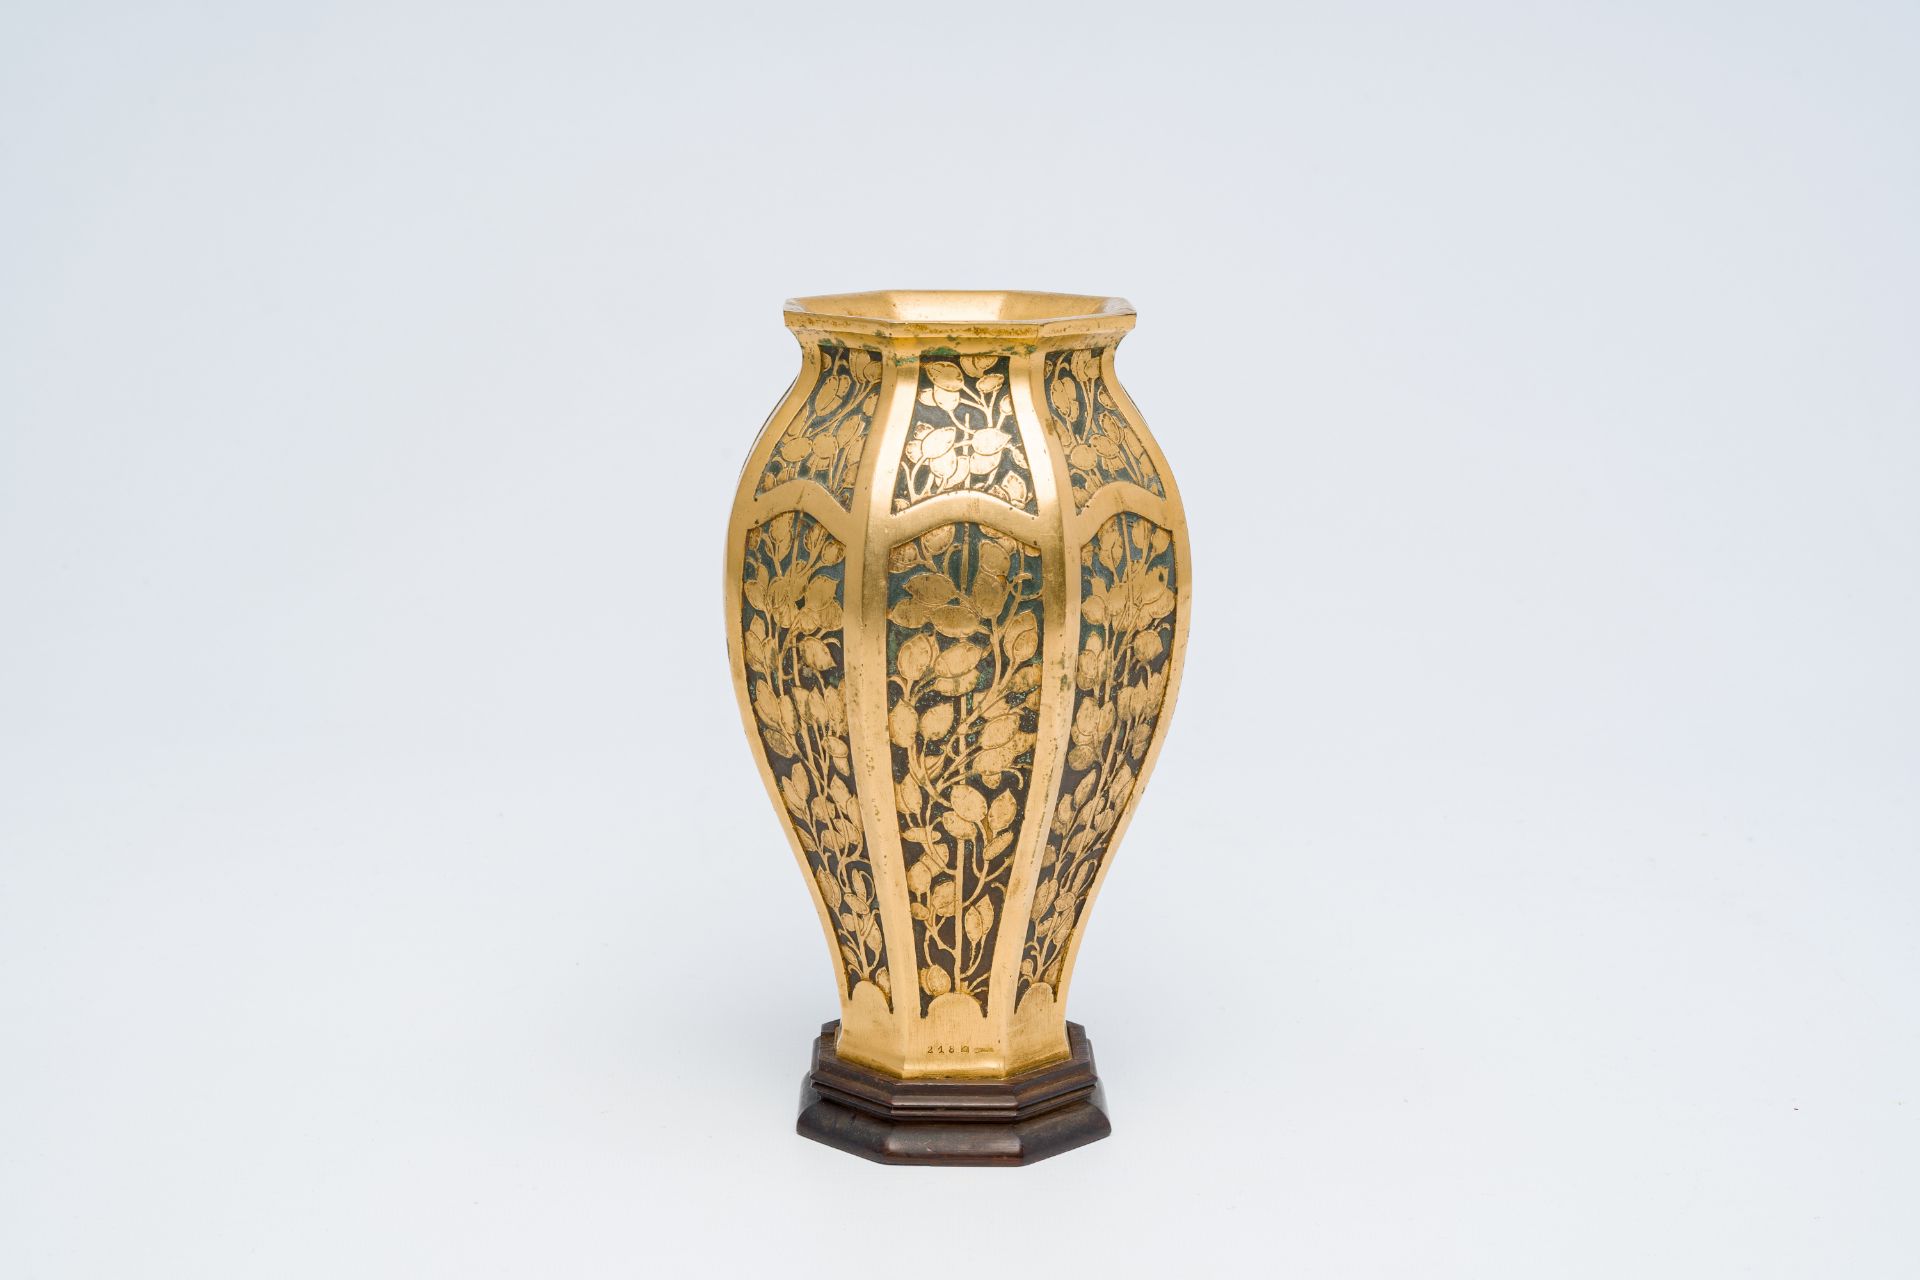 A French octagonal bronze vase with floral design, Christofle, first half 20th C.